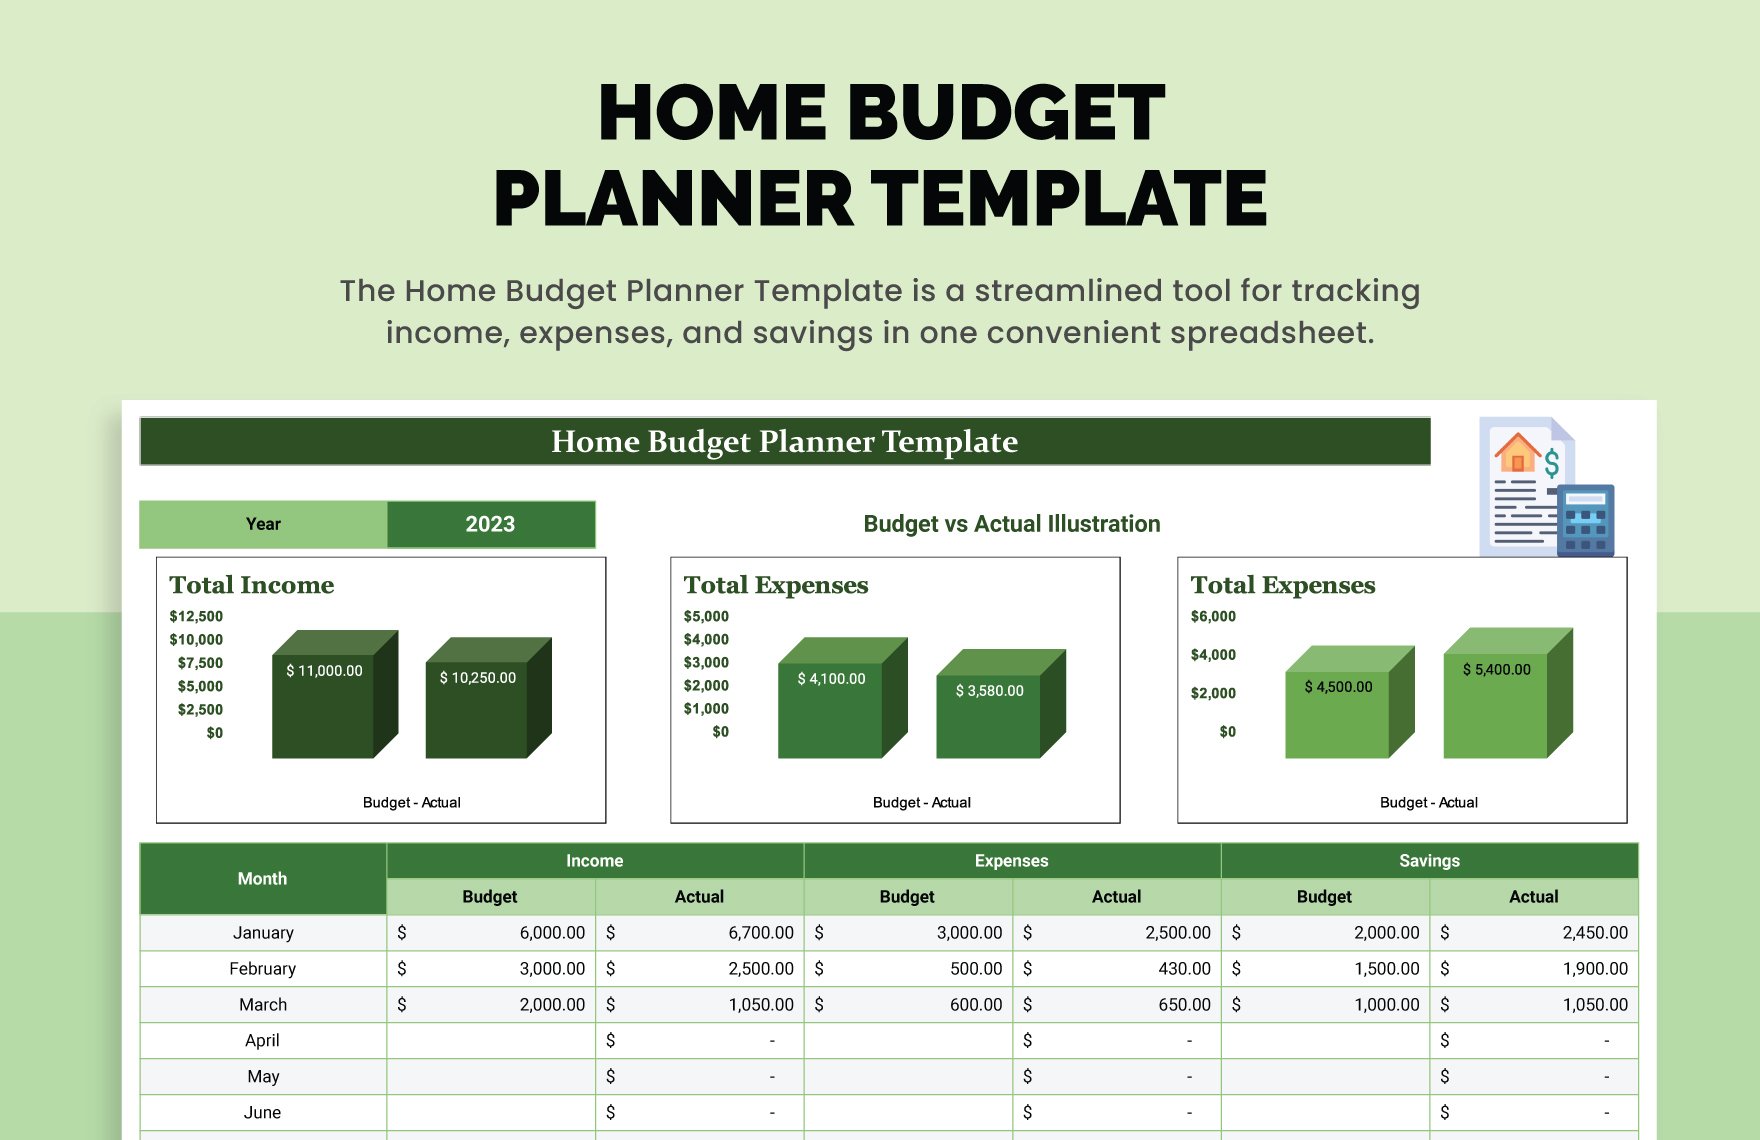 Home Budget Planner Template